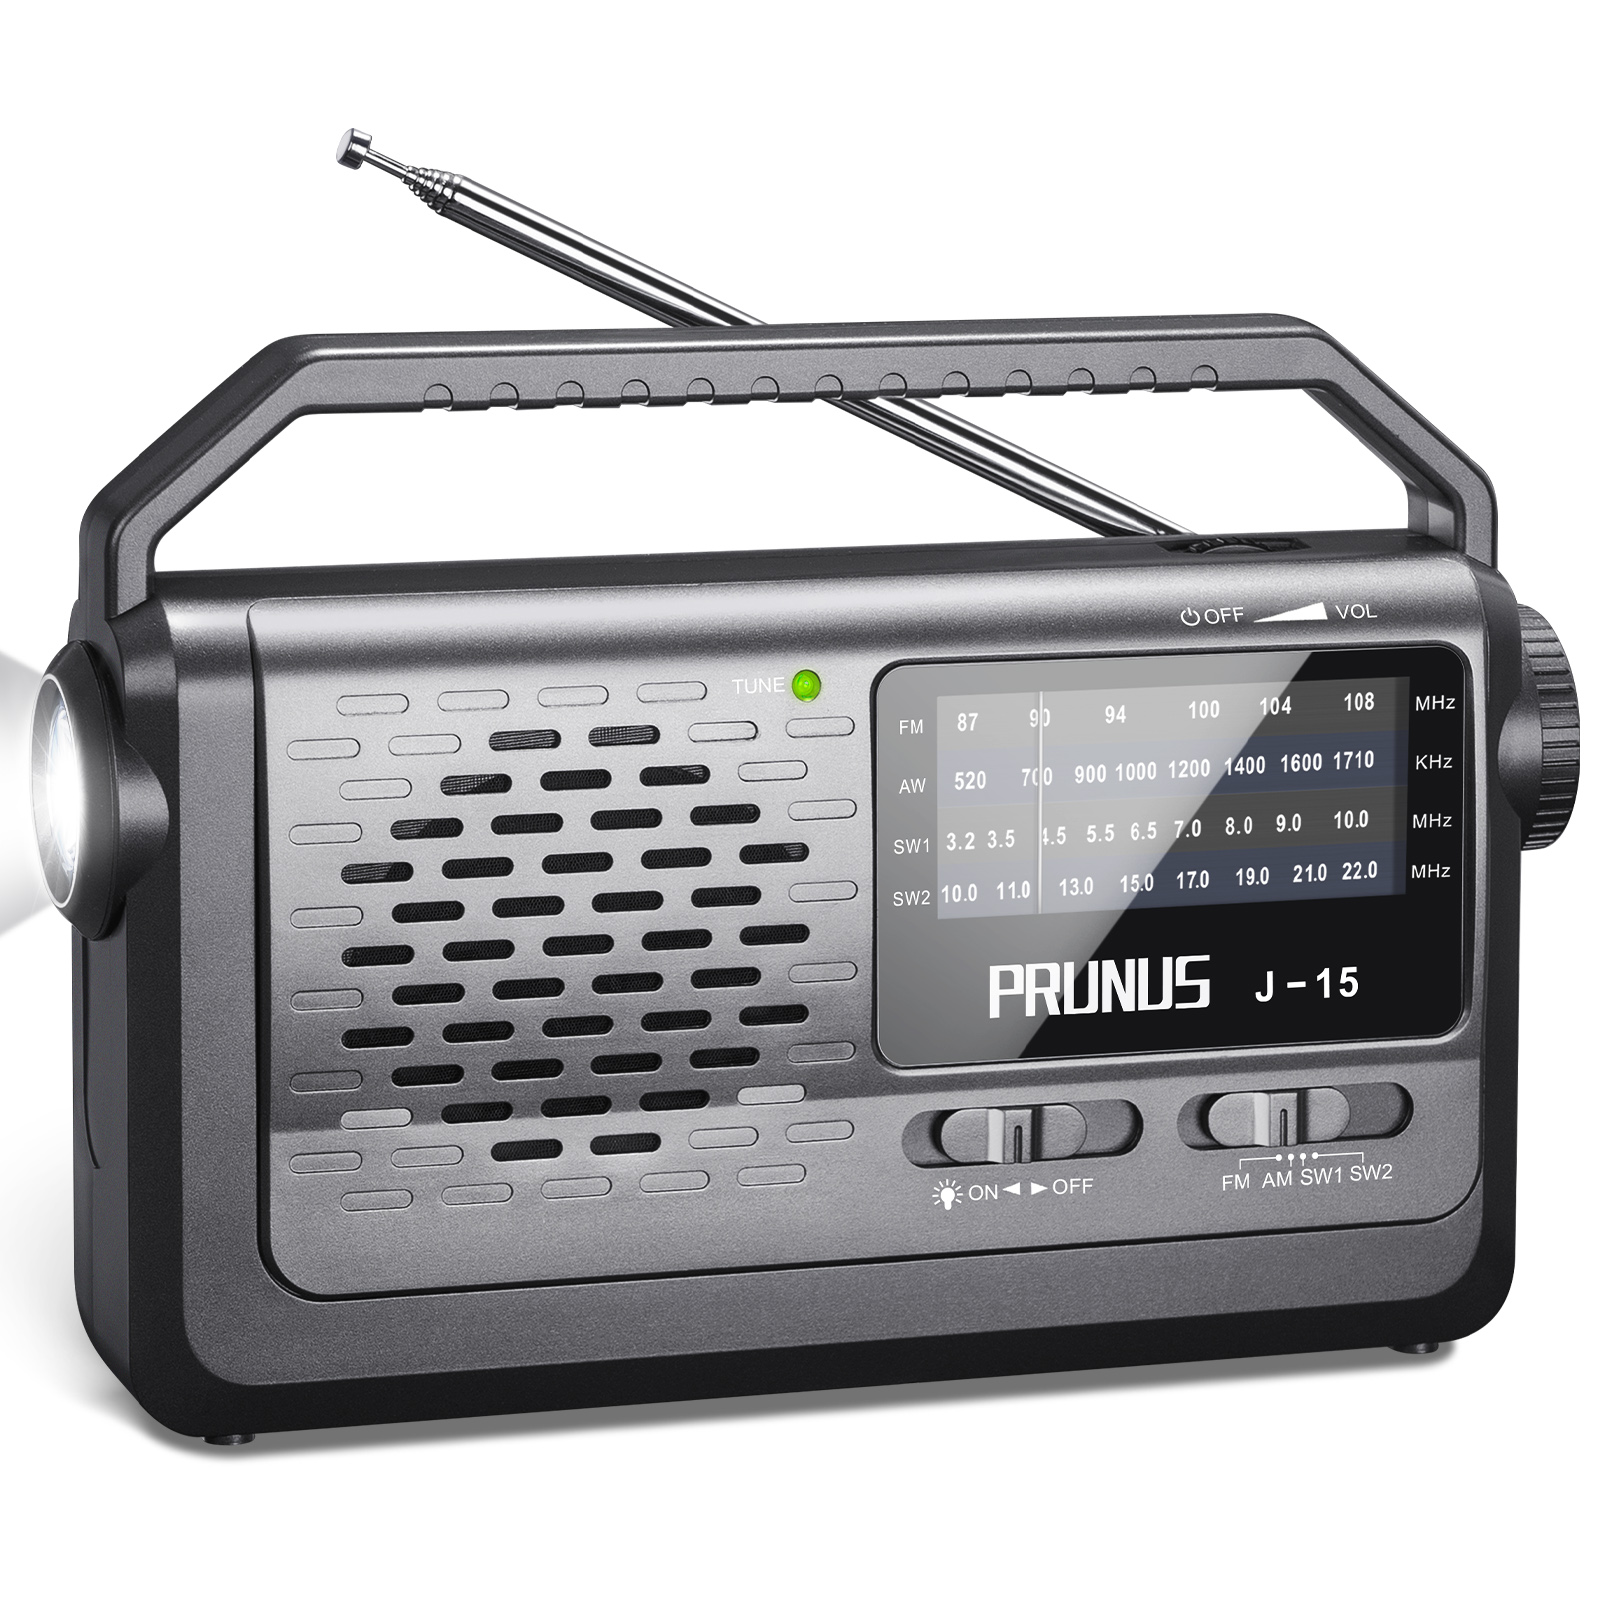 FREE GIFT】Retekess TR604 AM FM Radio, Portable Radios With Best Reception,  AC220V Powered Analog Radio, With Clear Dial And Large Knob, For  Home(Black) Lazada Singapore | Old Fashioned Fm Am (mw) Sw